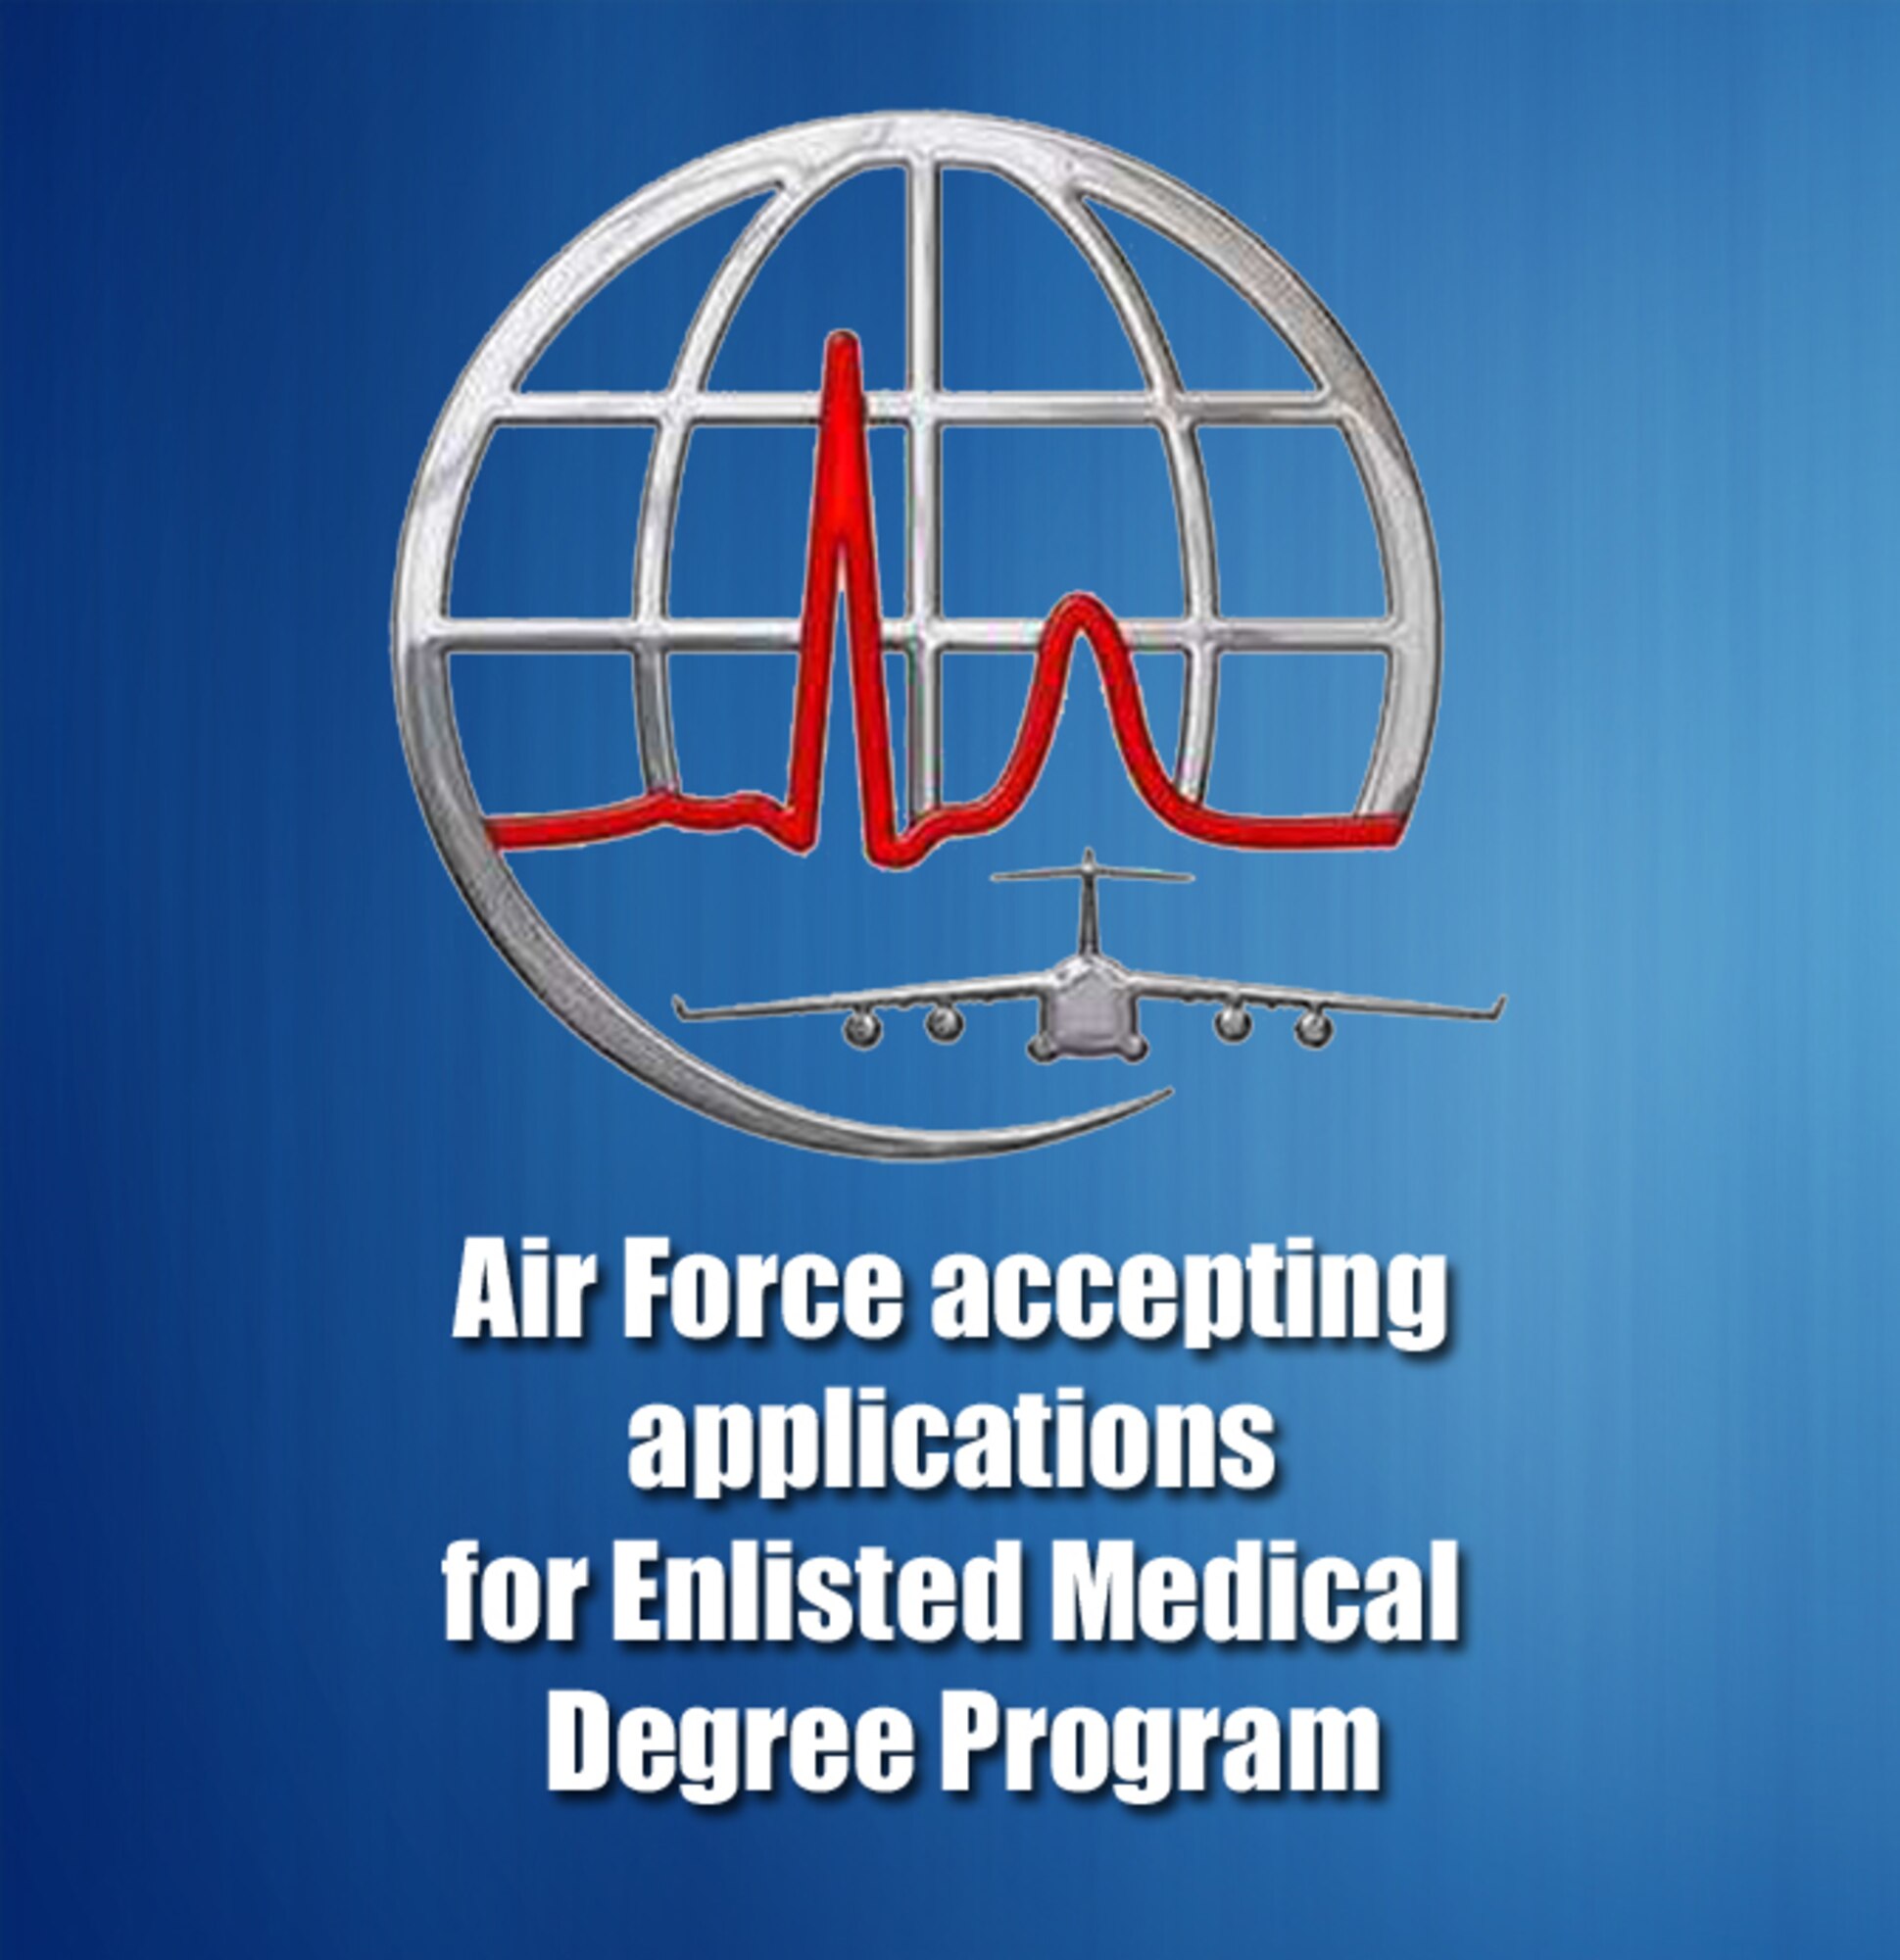 Eligible active duty enlisted Airmen interested in pursuing a medical degree must submit their intent to apply emails no later than Oct. 2